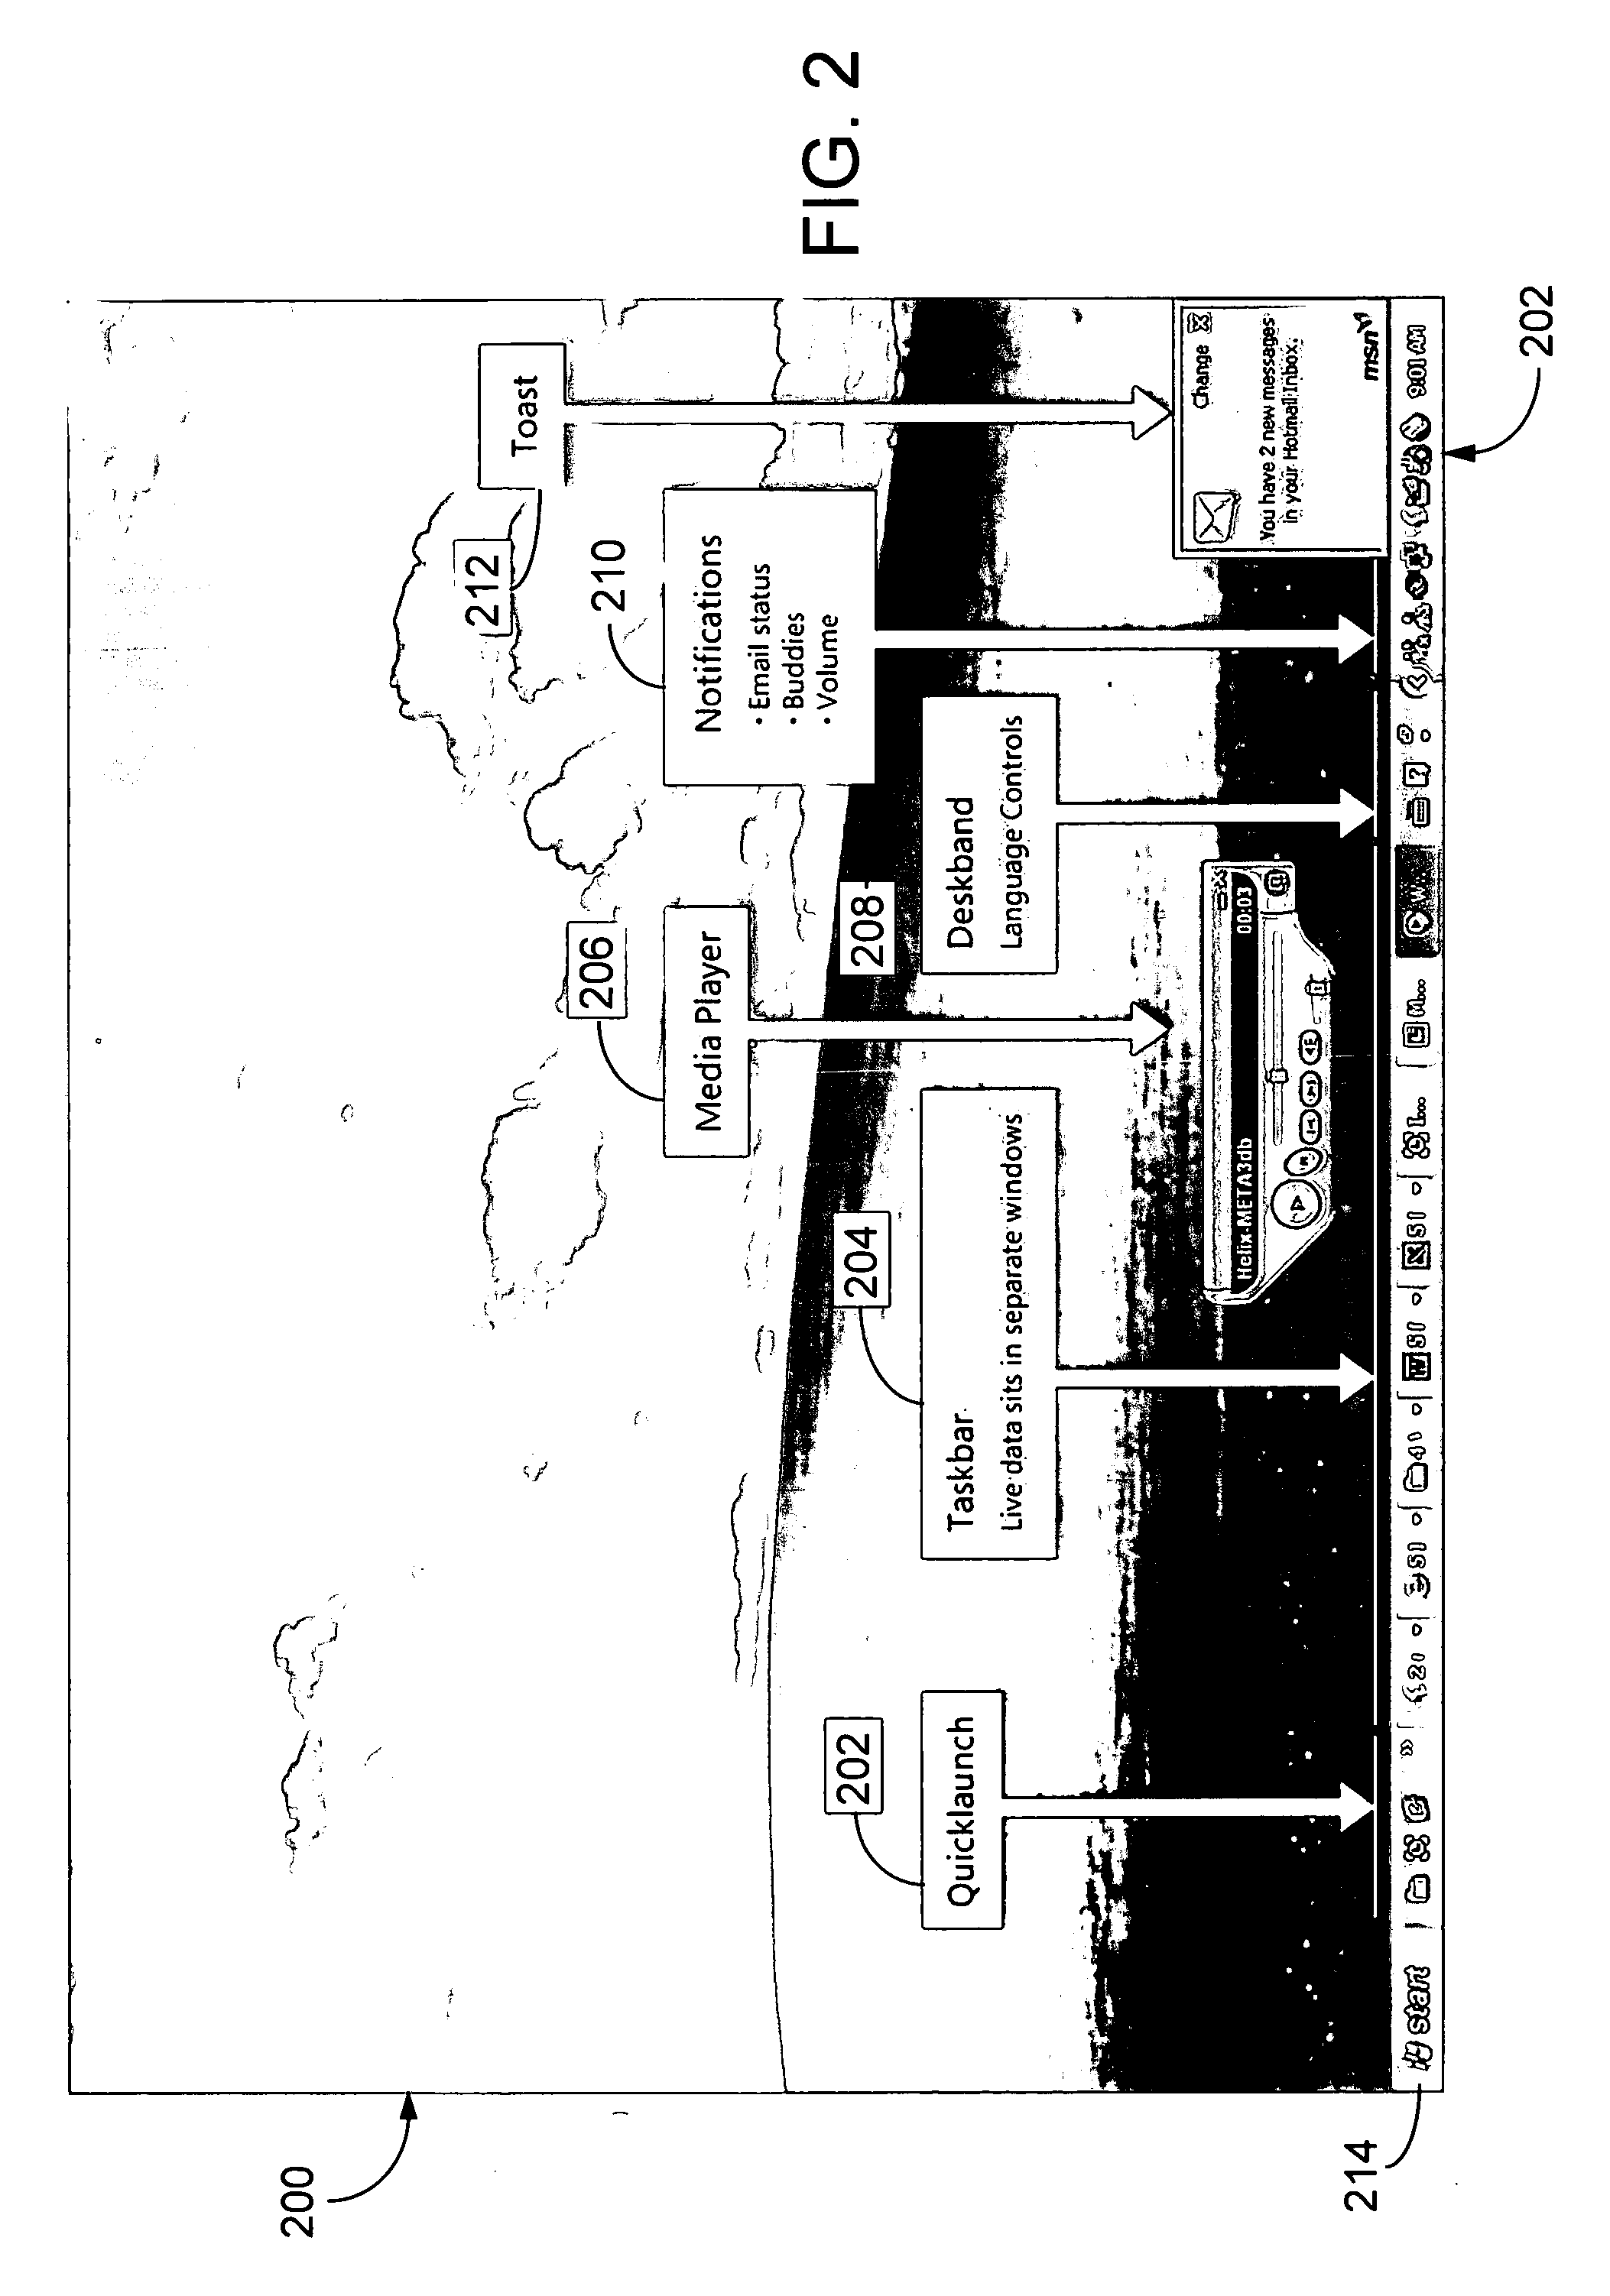 System and method for providing dynamic user information in an interactive display